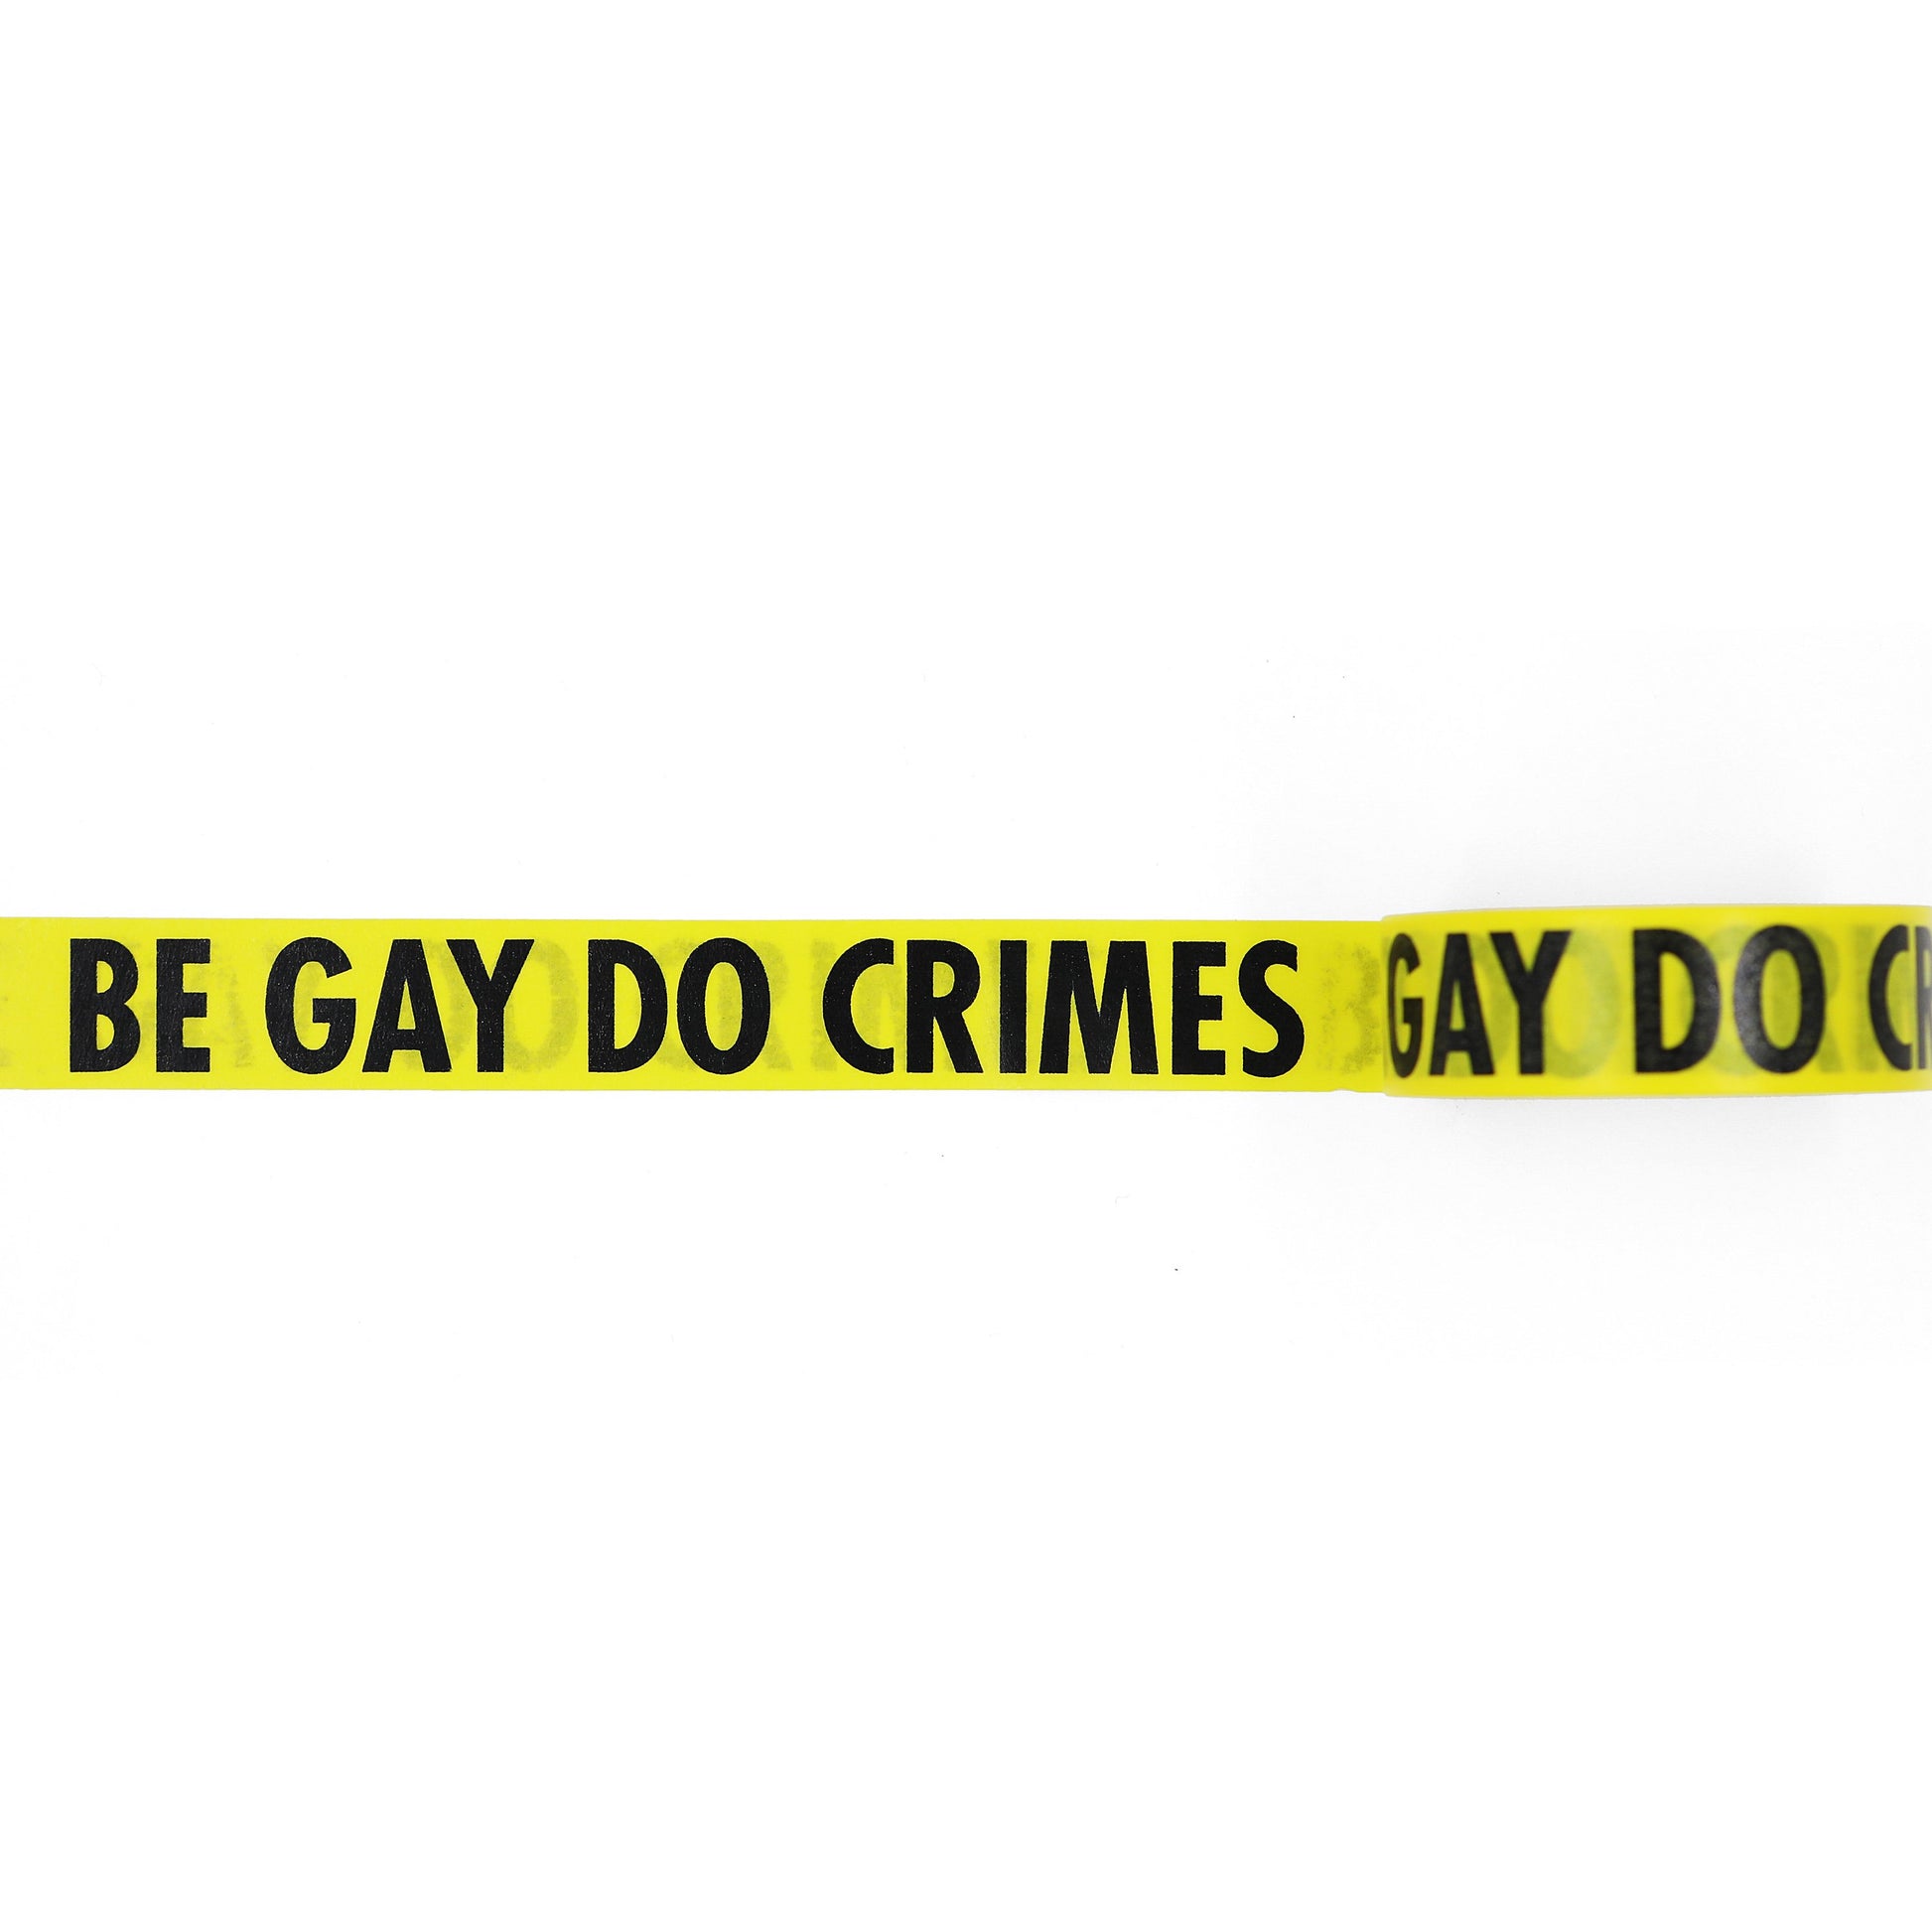 Yellow, caution-tape inspired washi tape with black "BE GAY DO CRIMES" text on white background